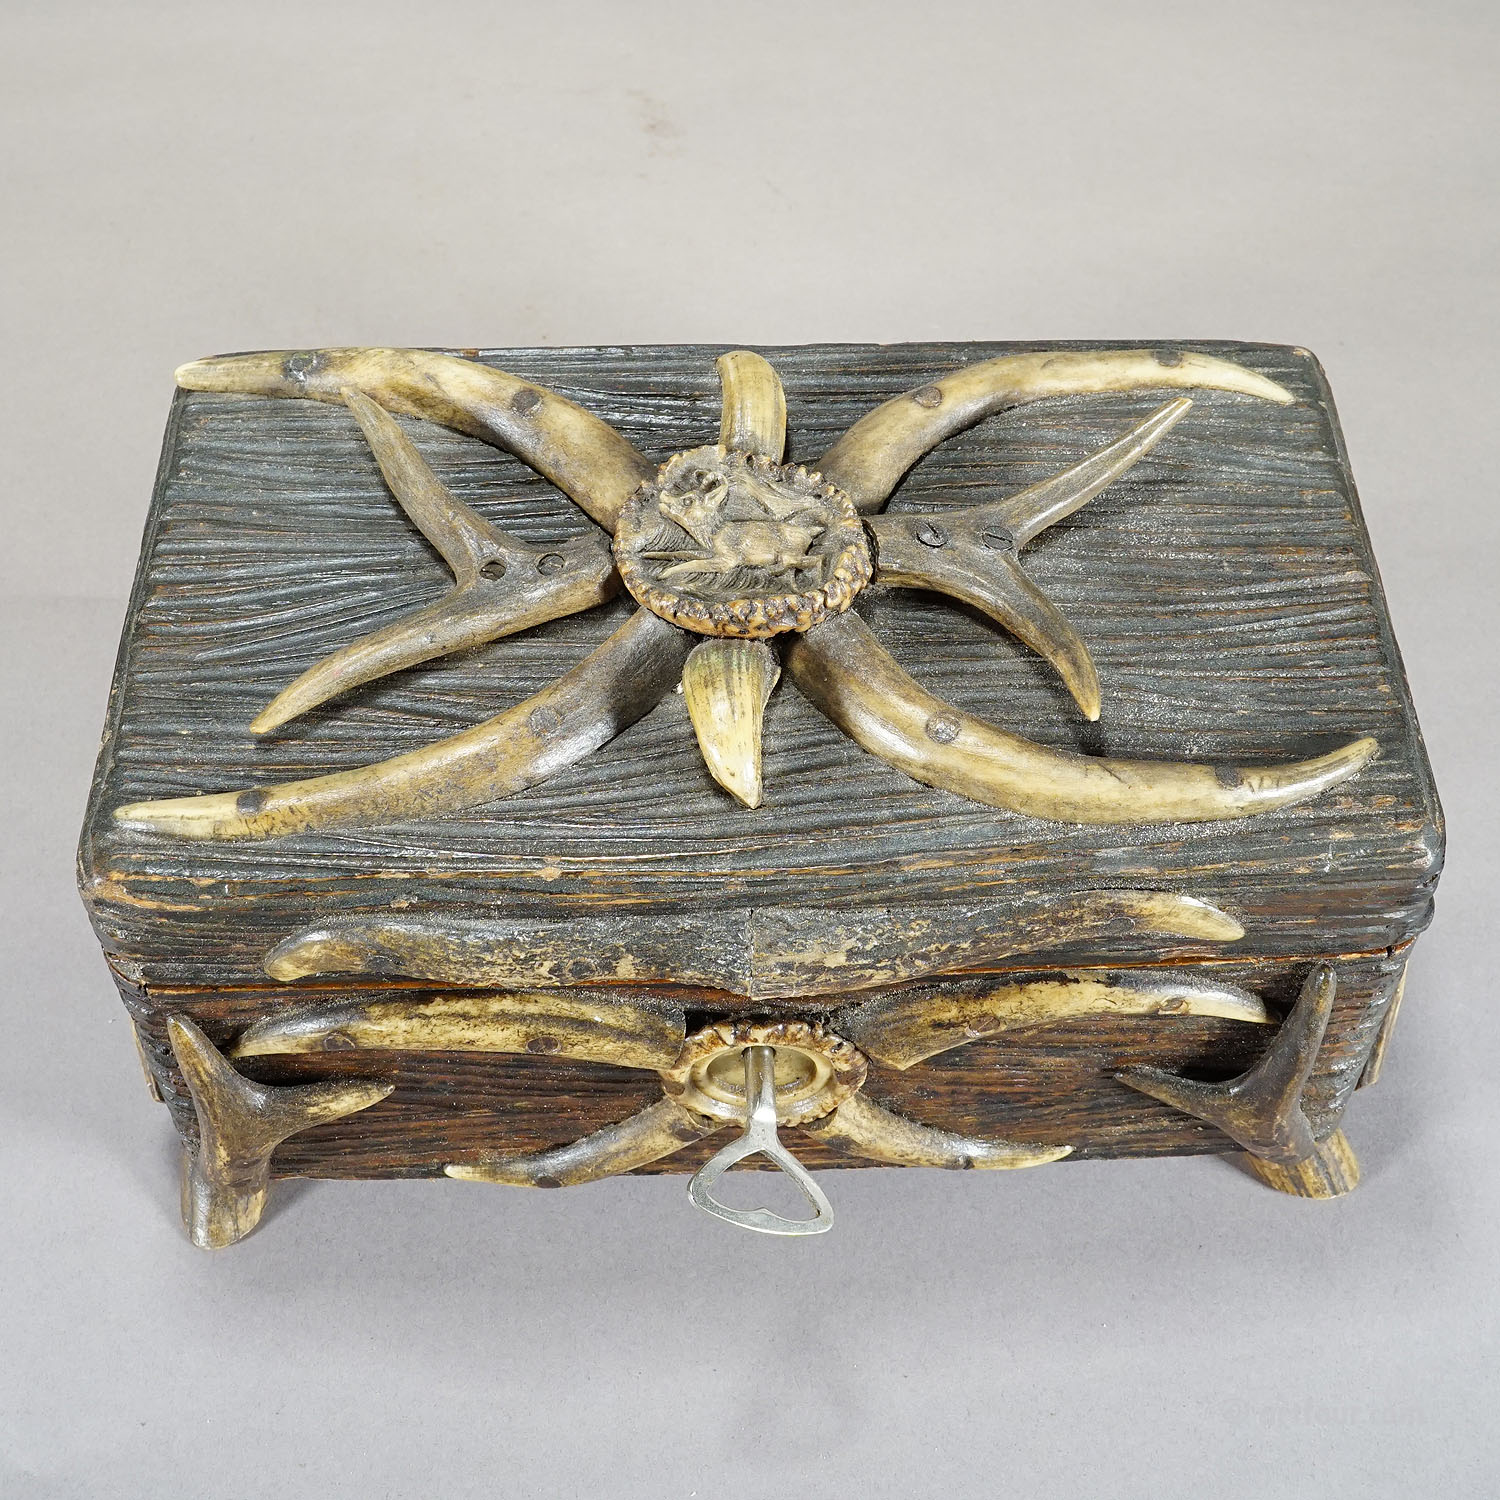 Antique Black Forest Casket with Antlers Decoration circa 1900s